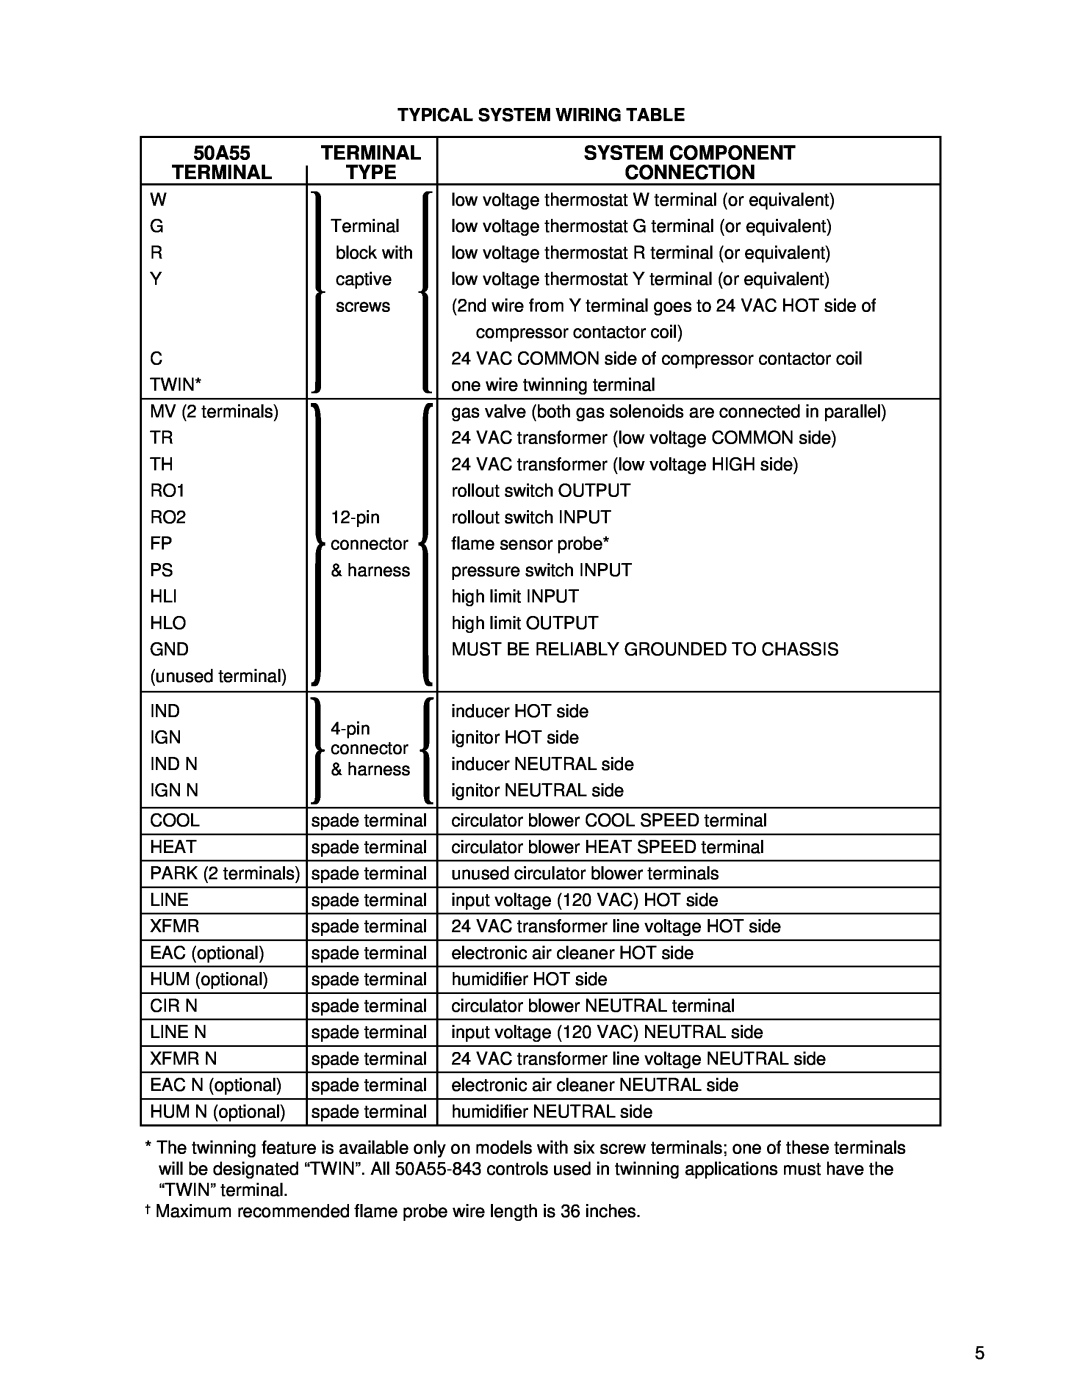 White Rodgers 50A55-843 installation instructions Typical System Wiring Table, Terminal, System Component, Connection, Type 